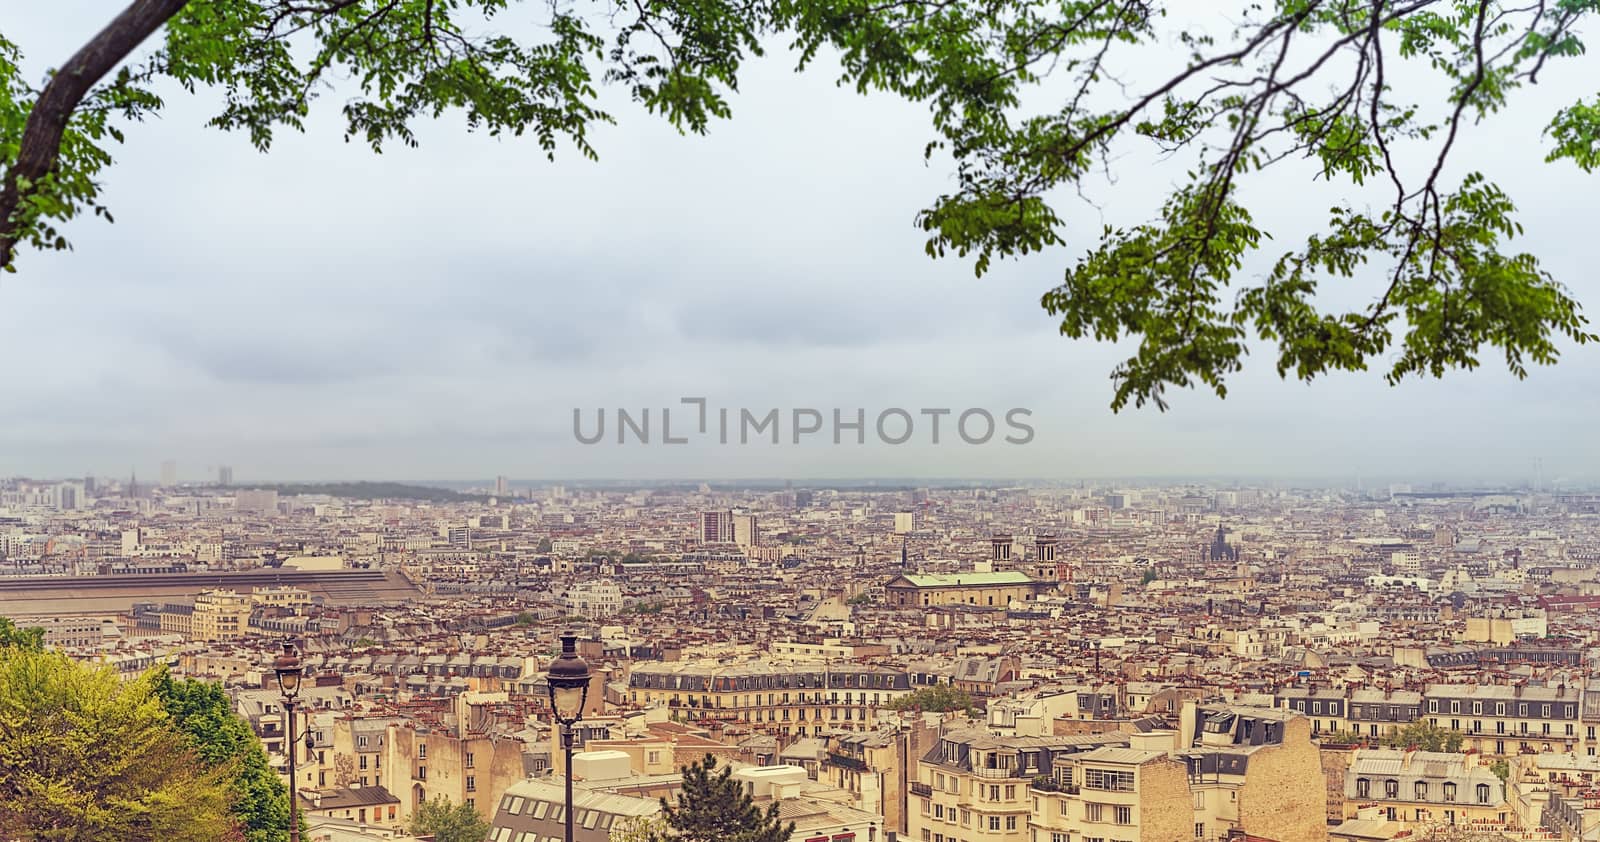 Panoramic distant scene of Paris skyline and urban and industrial areas